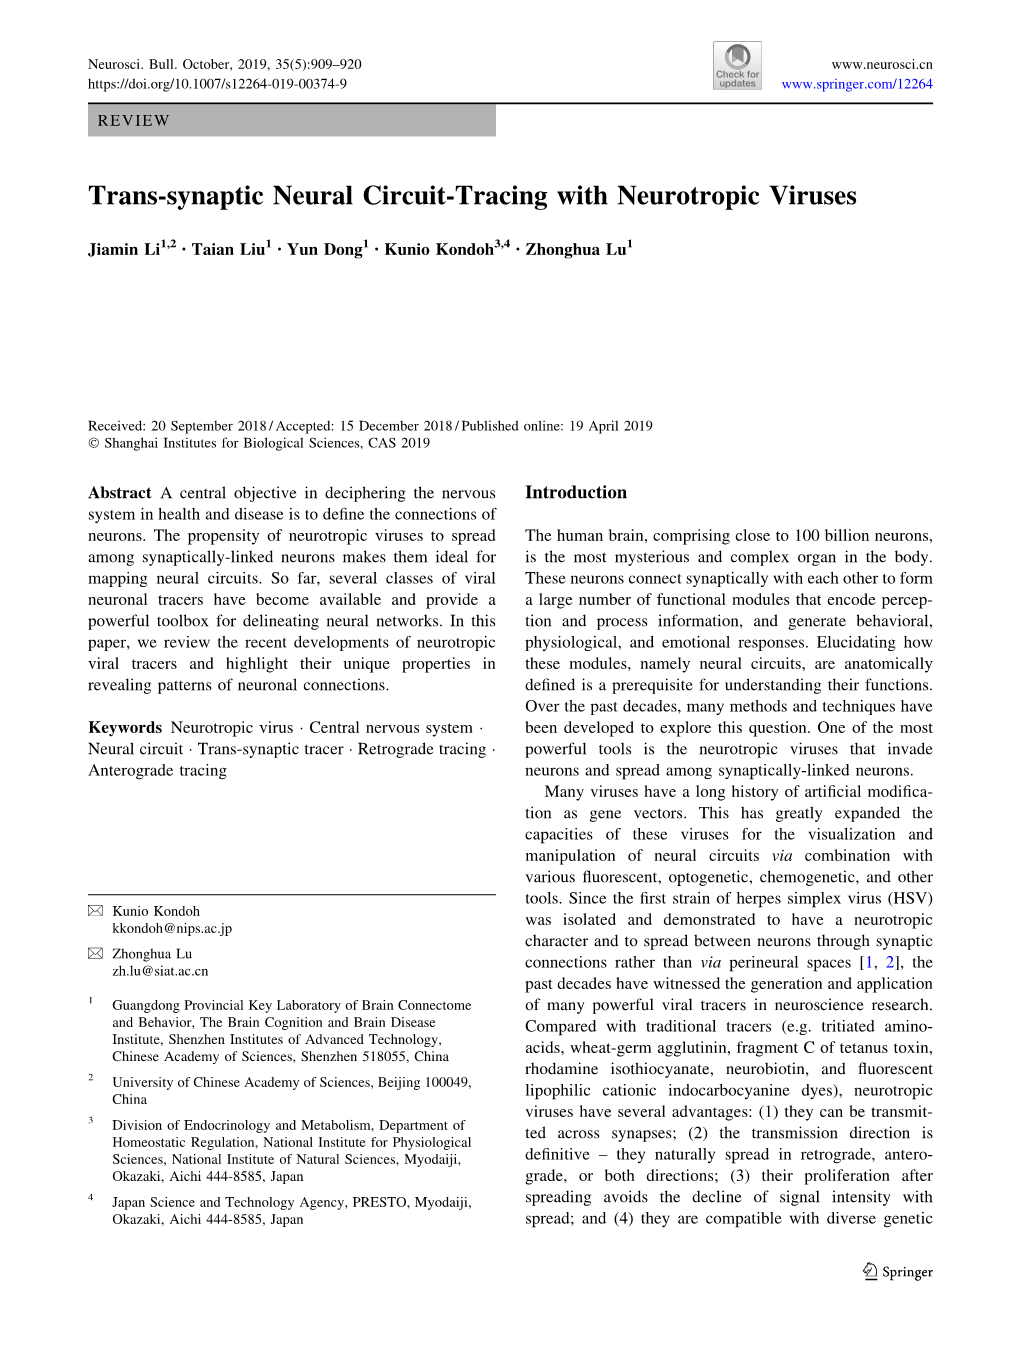 Trans-Synaptic Neural Circuit-Tracing with Neurotropic Viruses